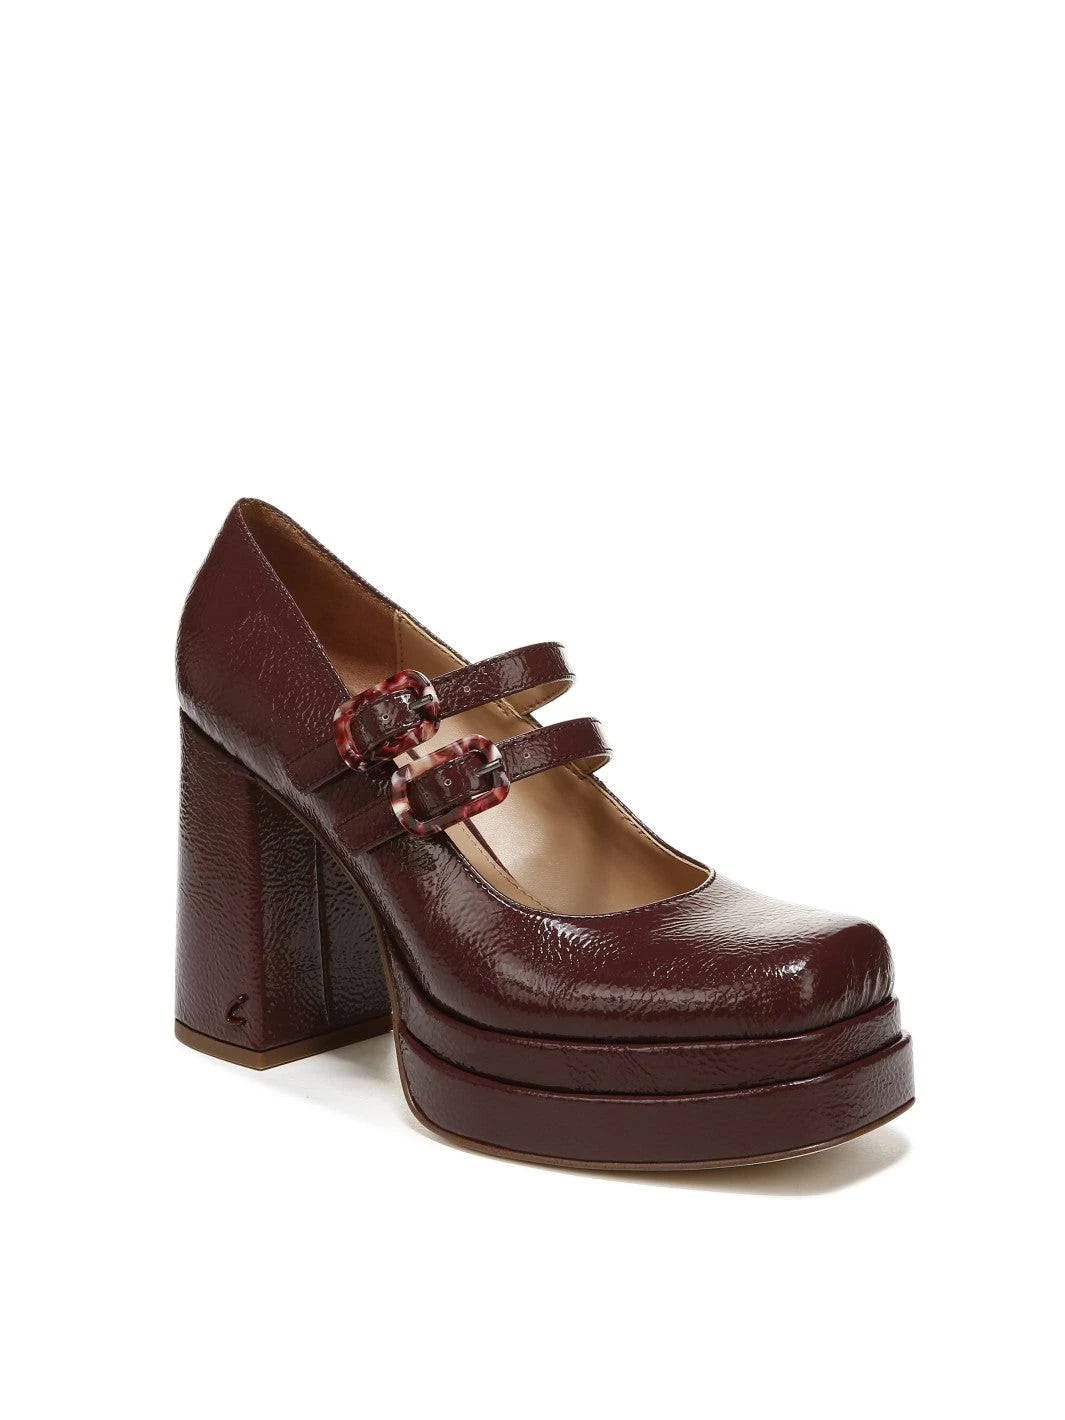 Retro Platform Heels with Double Buckles and Large Chunky Sole | Image